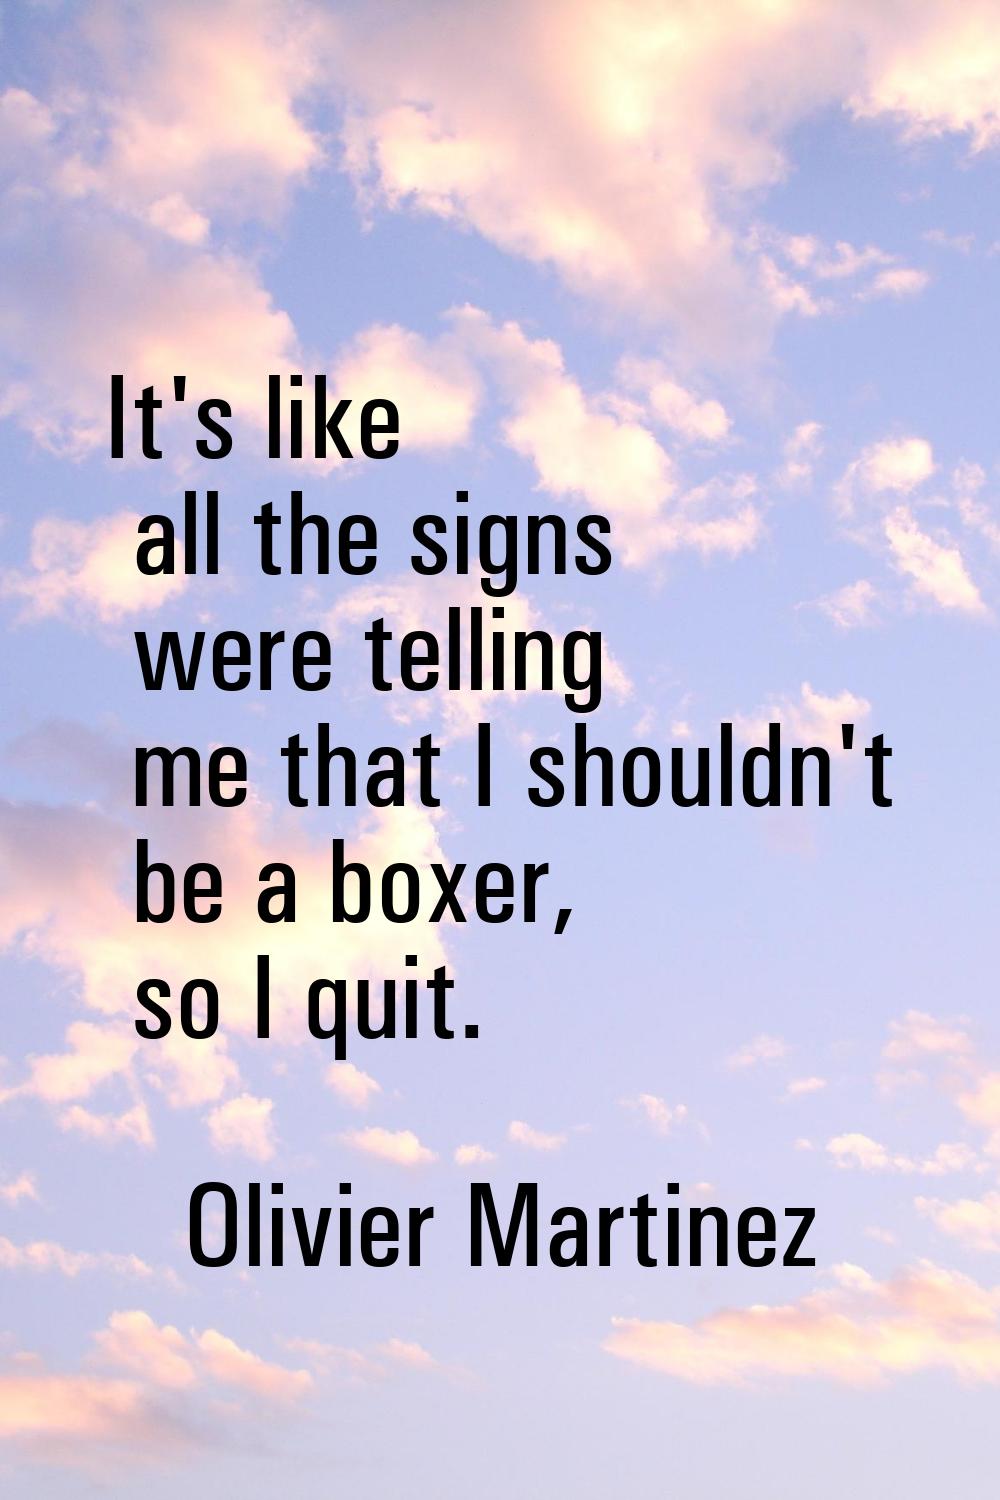 It's like all the signs were telling me that I shouldn't be a boxer, so I quit.